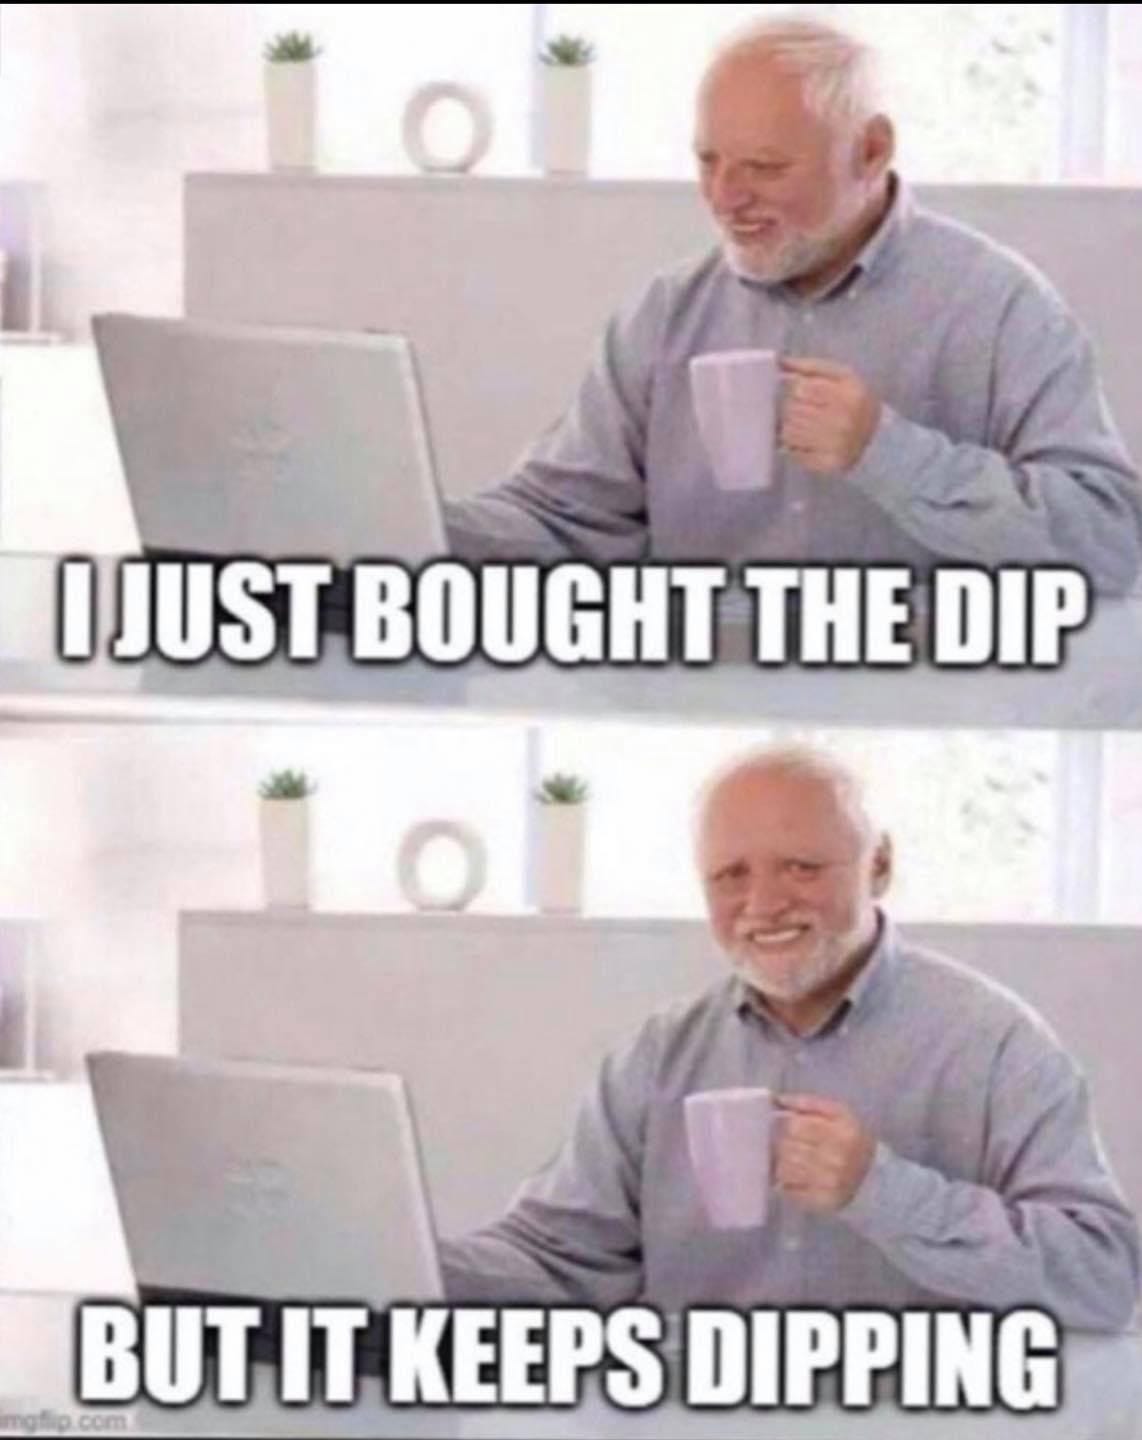 May be an image of text that says 'I JUST BOUGHT THE DIP BUT IT KEEPS DIPPING'